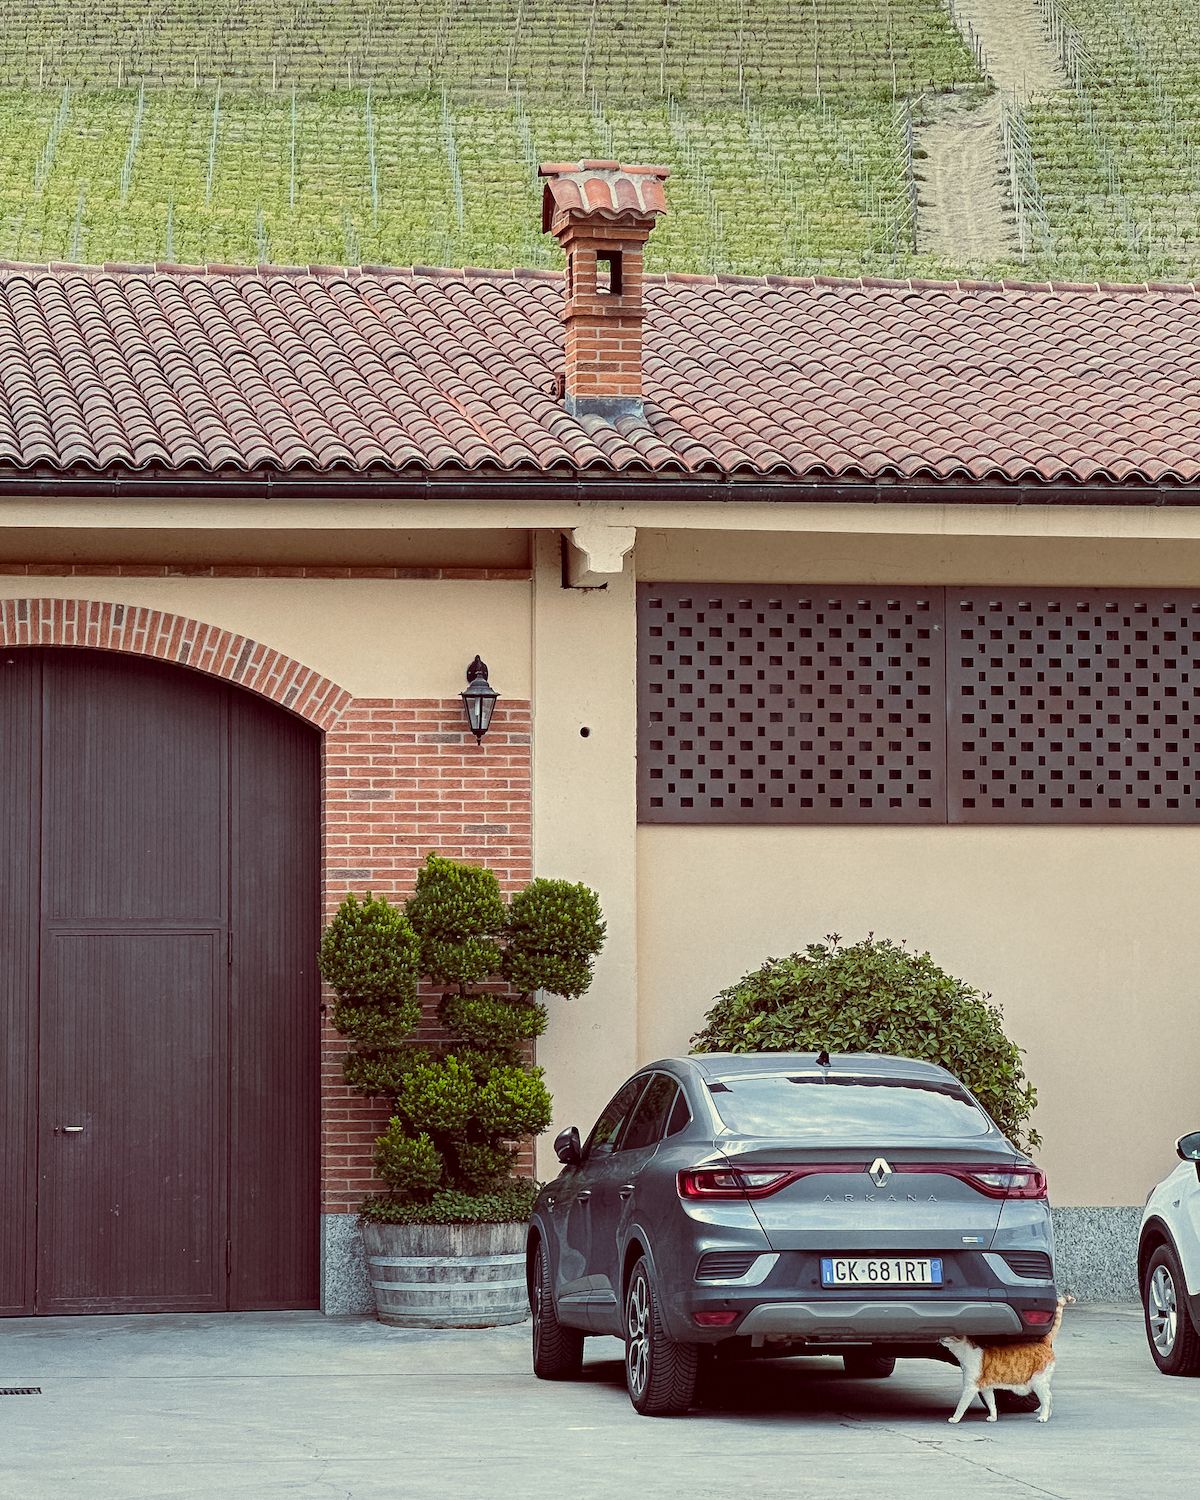 Terracotta roof winery with vines behind it and a grey car with an orange and white cat underneath